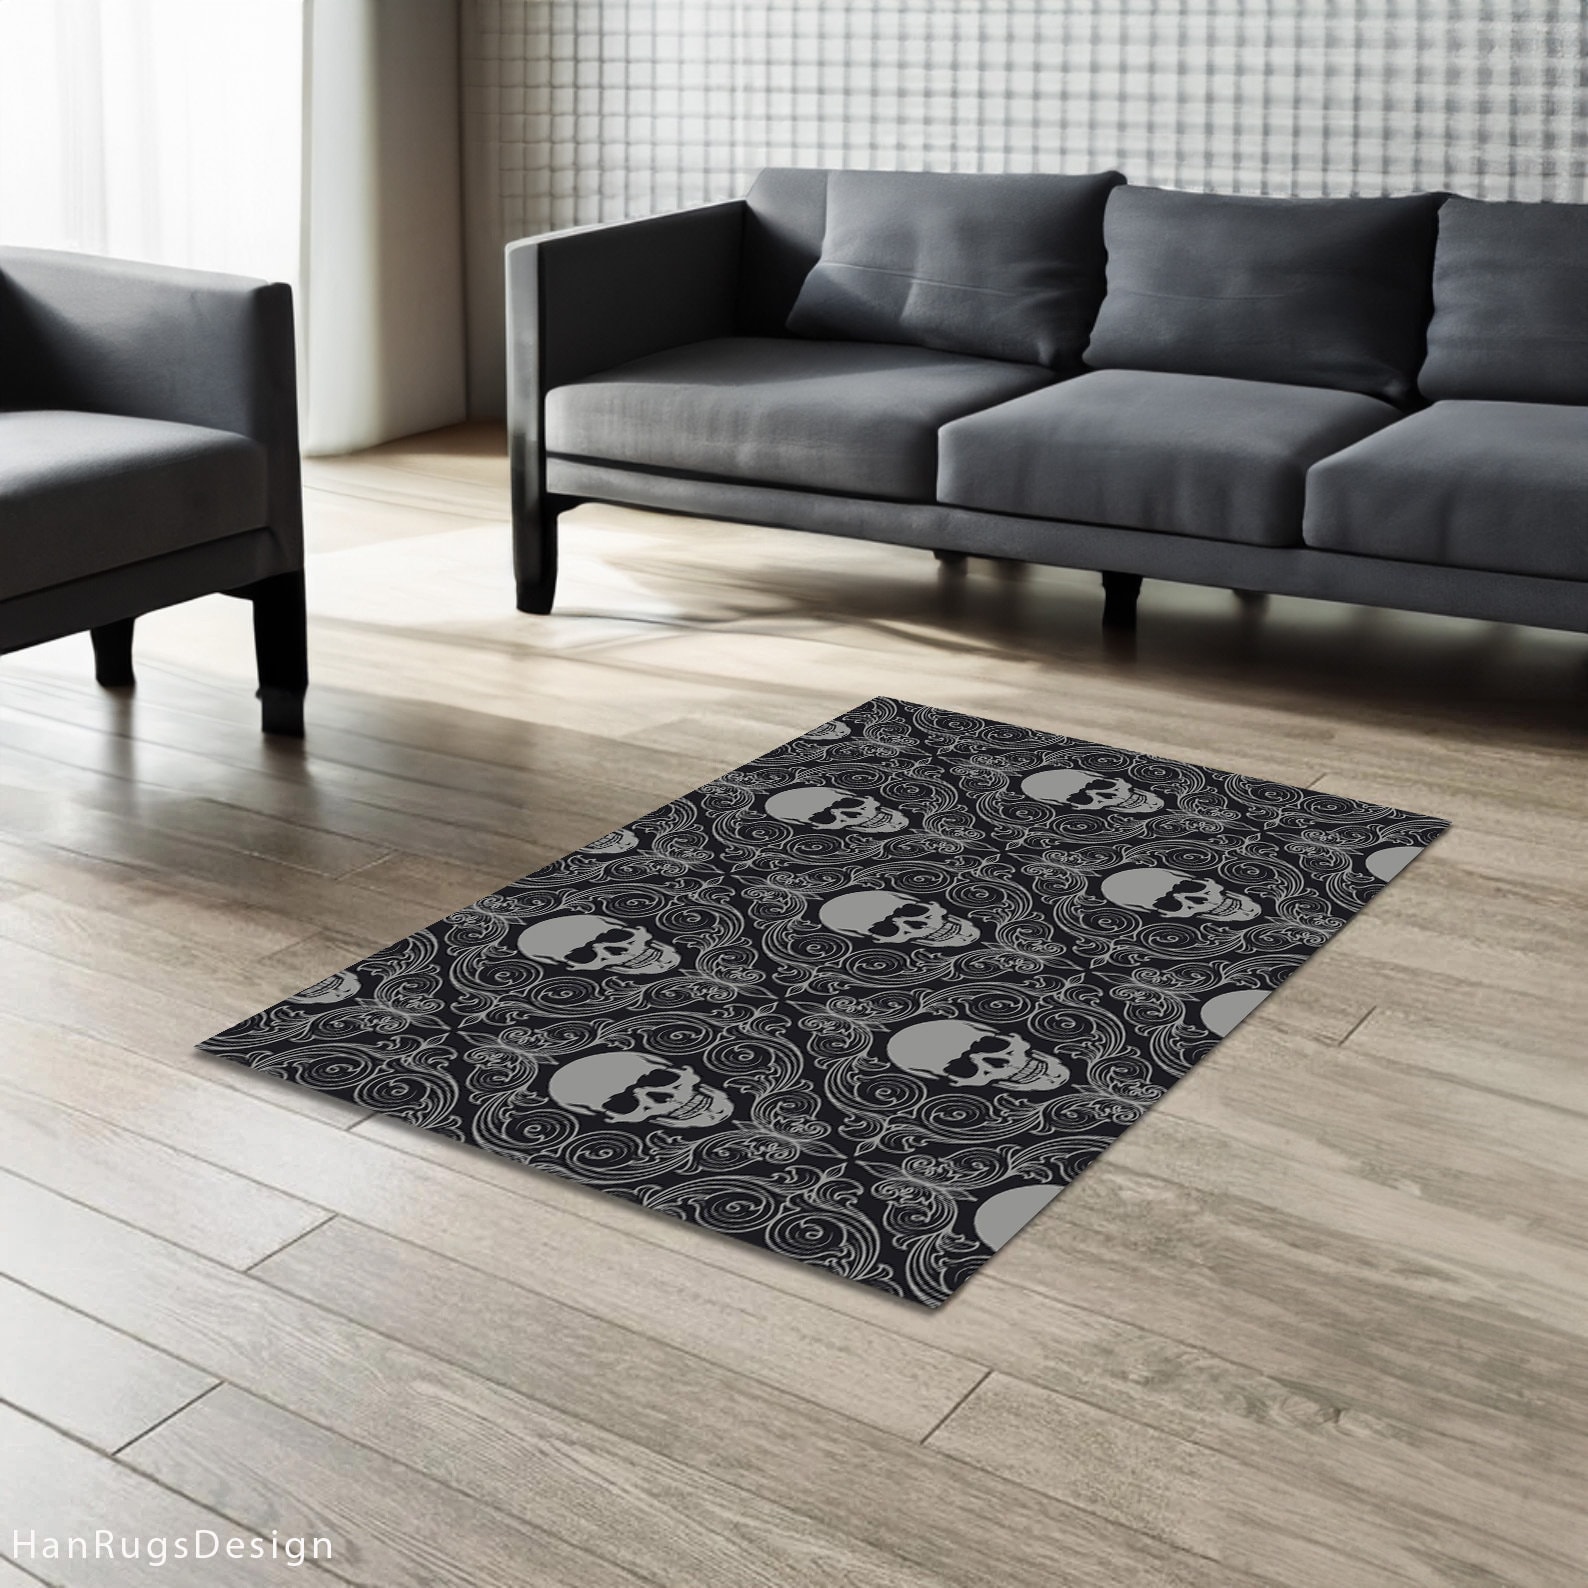 Discover Skull Rug, Abstract Design Carpet, Black and Gray Rug for Unique Home Decor, Trendy Printed Area Rug, Washable Rug, Non Slip Rug, Area Rug